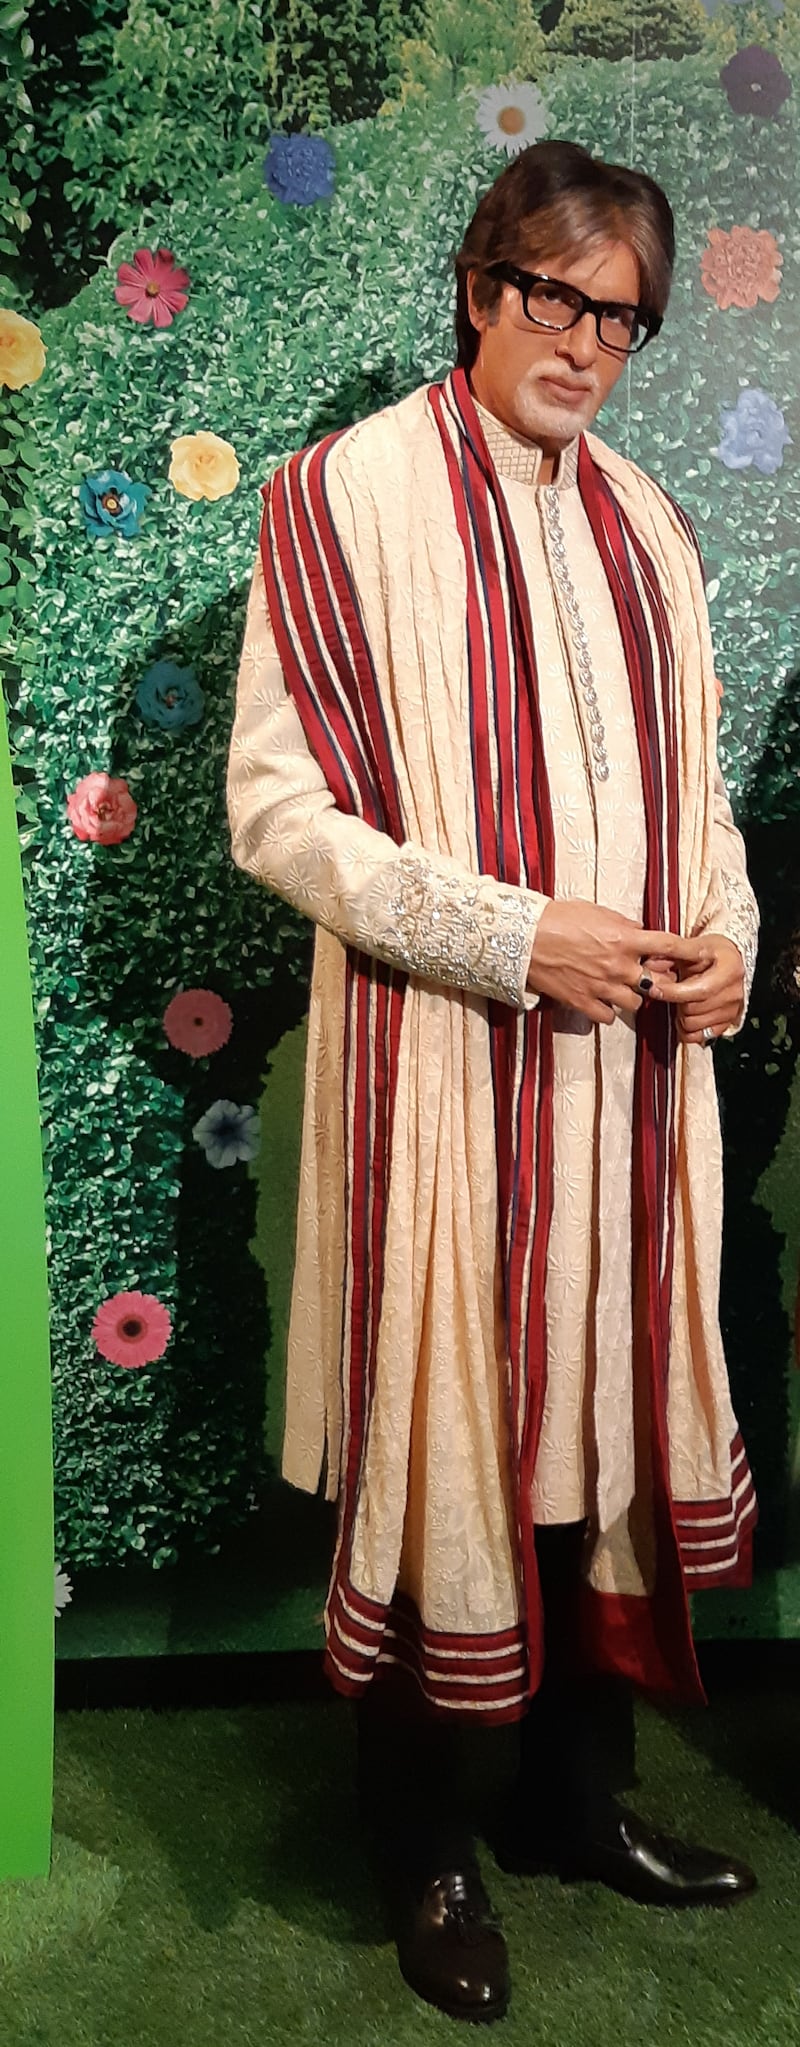 A wax figure of the beloved Indian actor Amitabh Bachchan